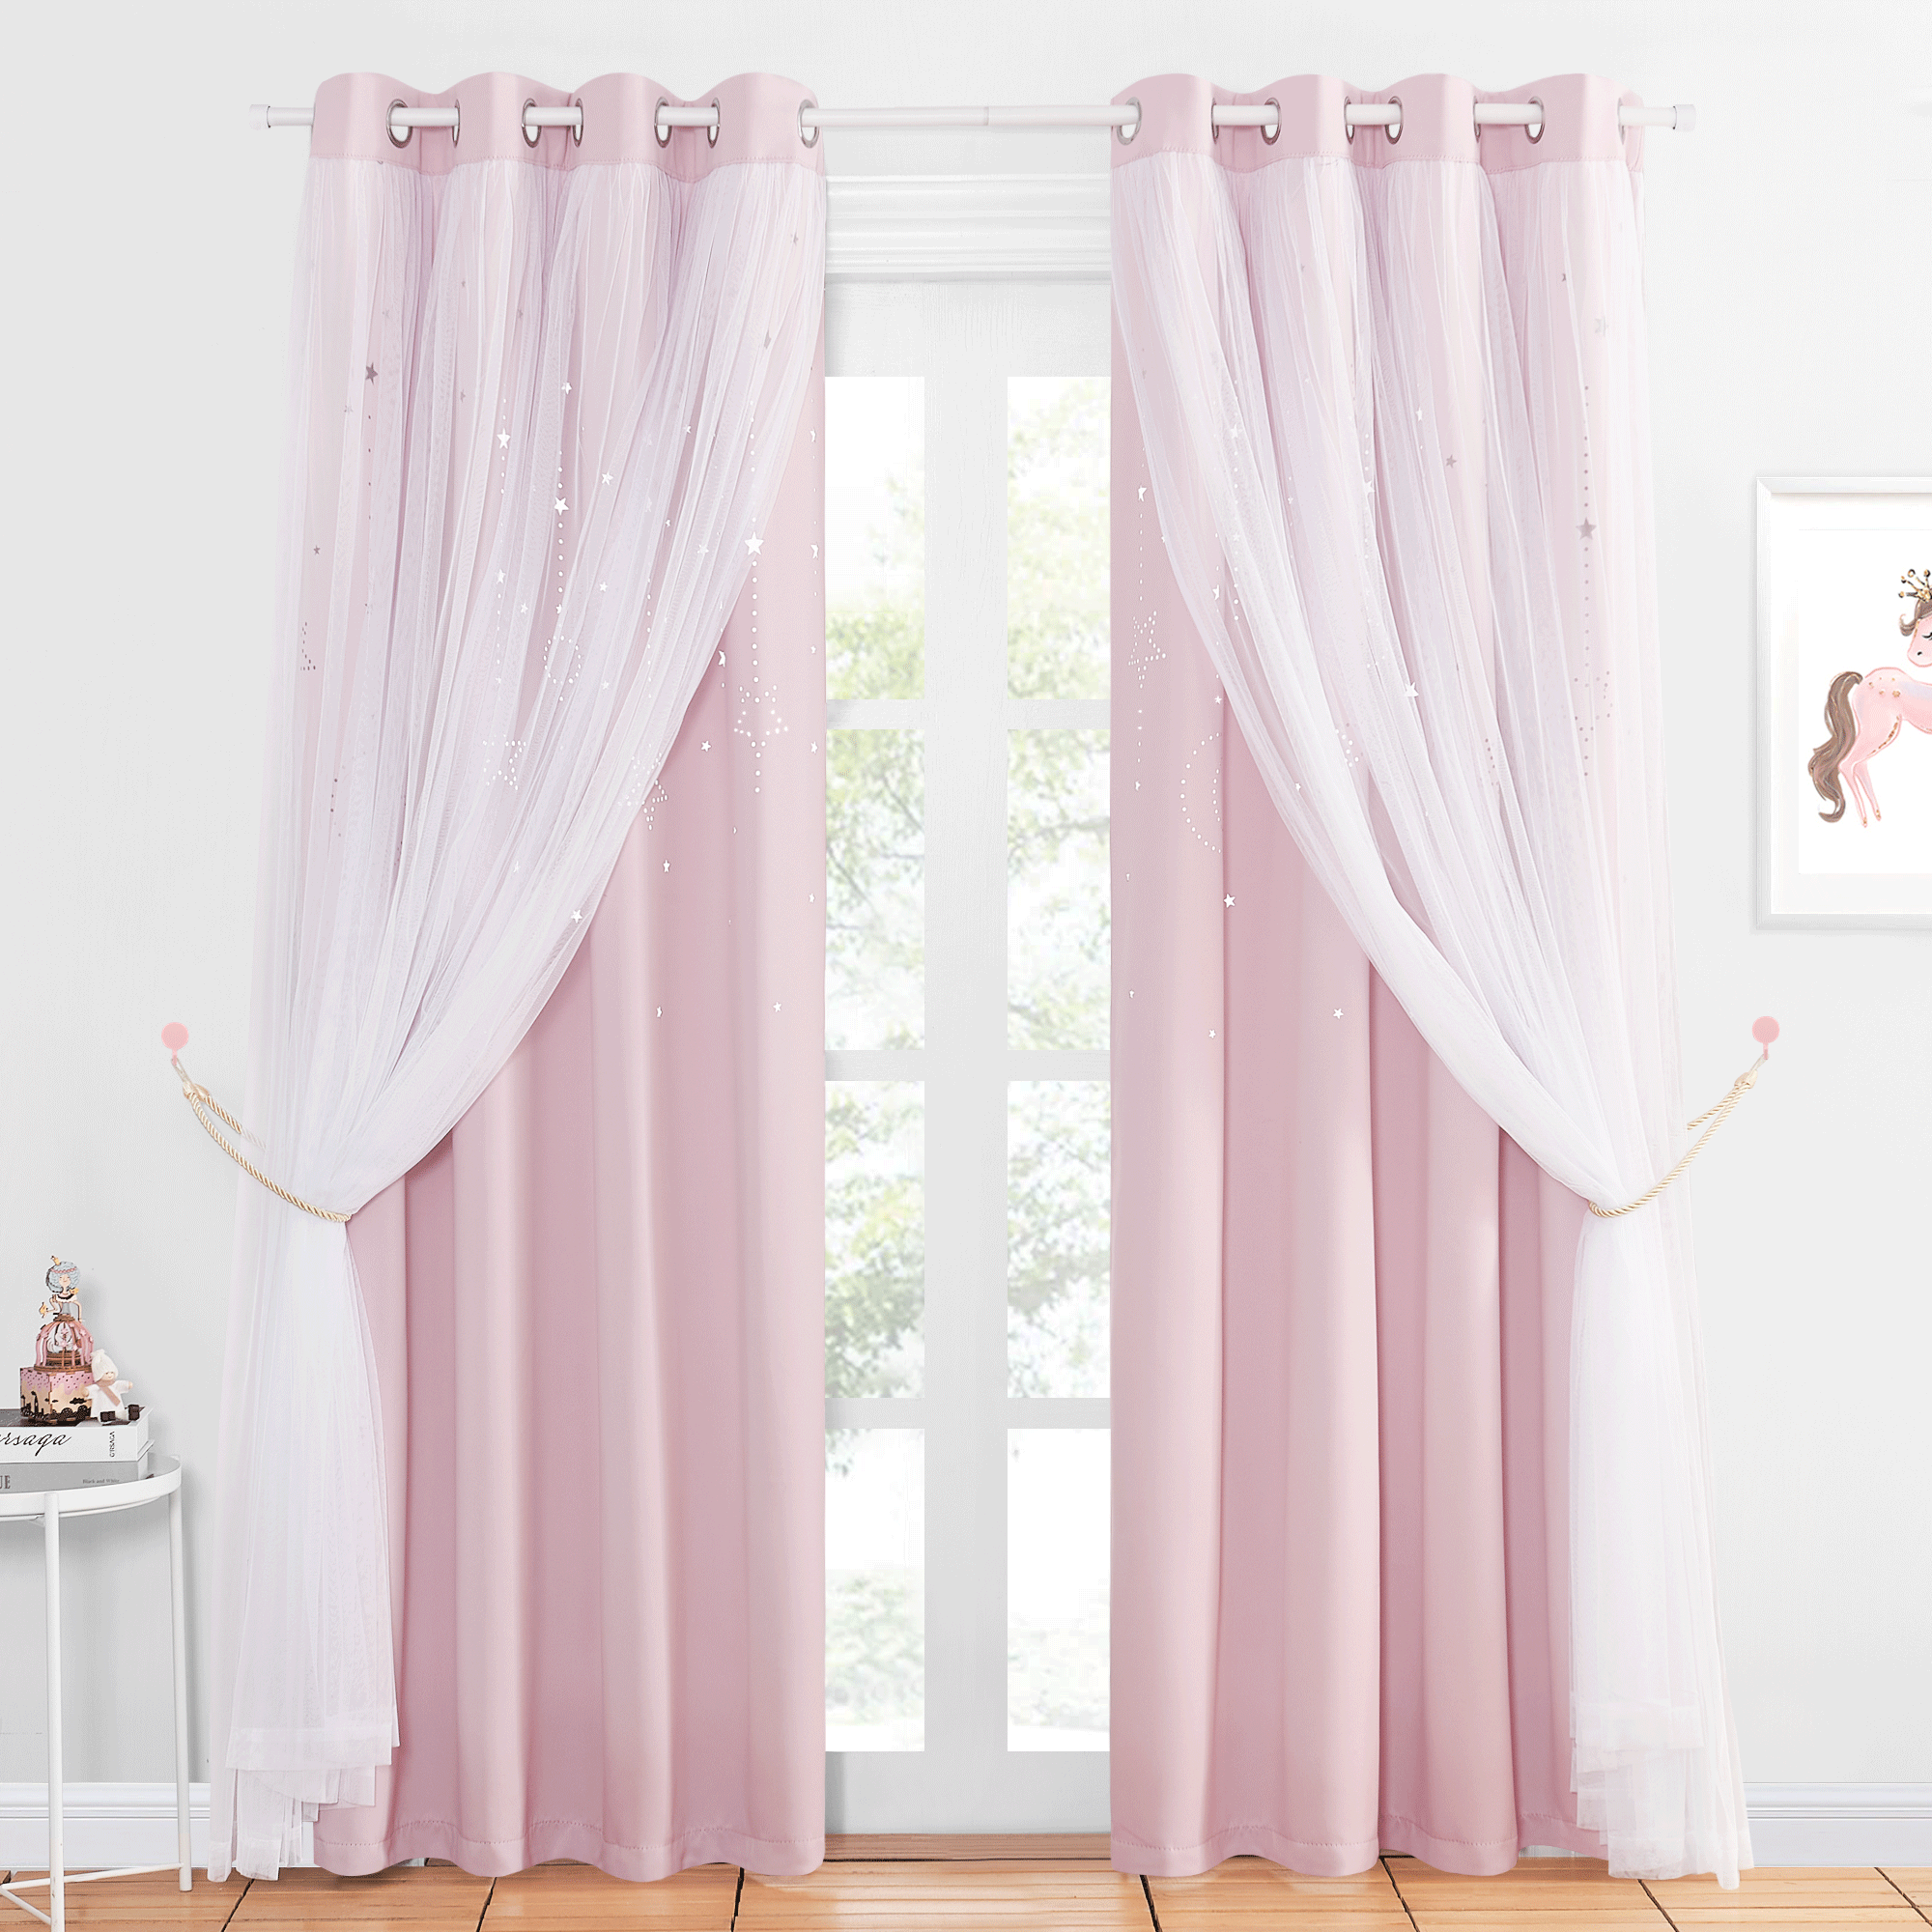 Hollow-Out Curtains Blackout Curtain With Sheer Curtain Overlay 1 Panel KGORGE Store